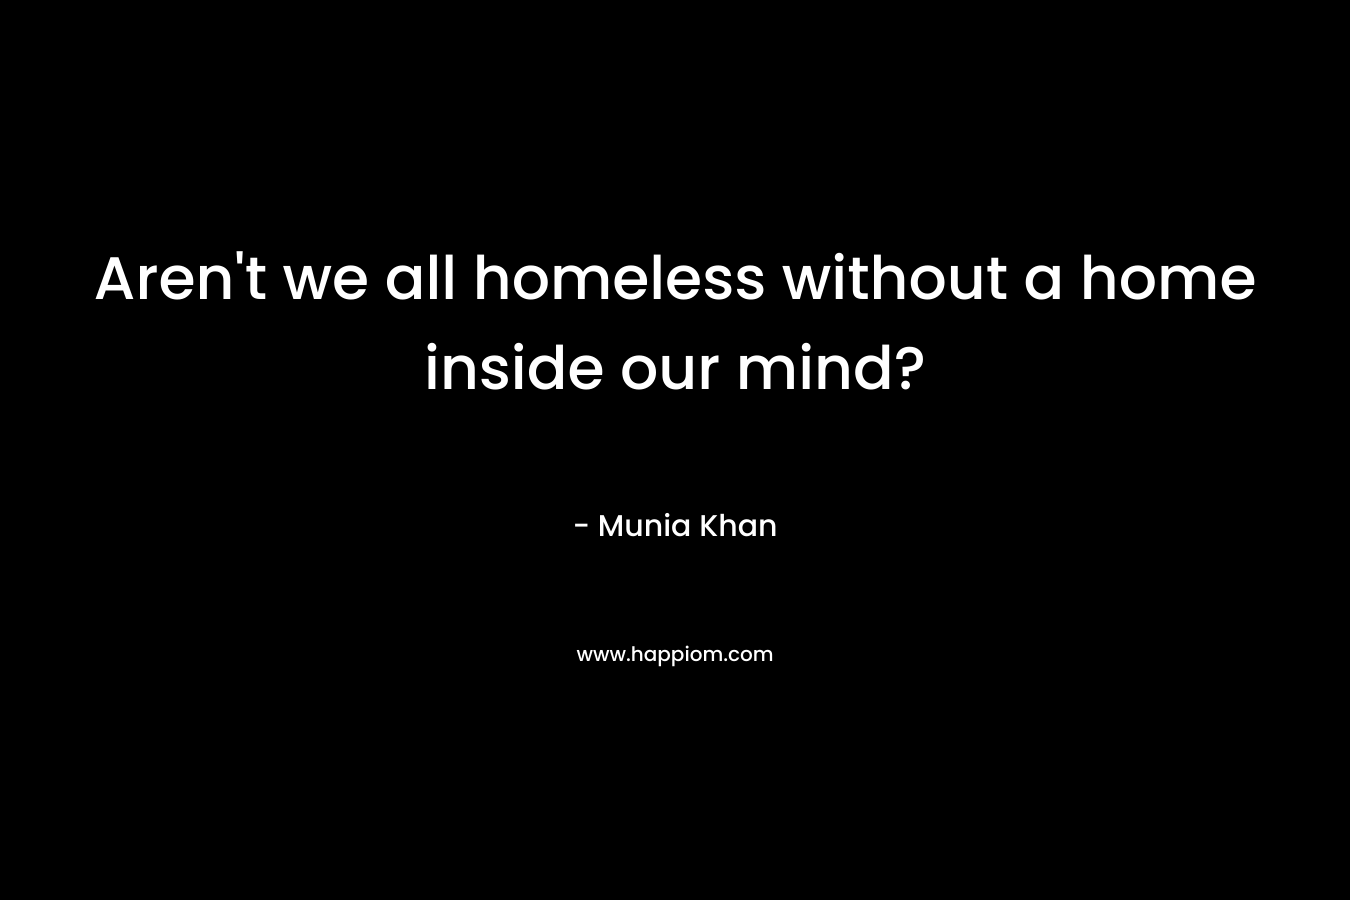 Aren't we all homeless without a home inside our mind?